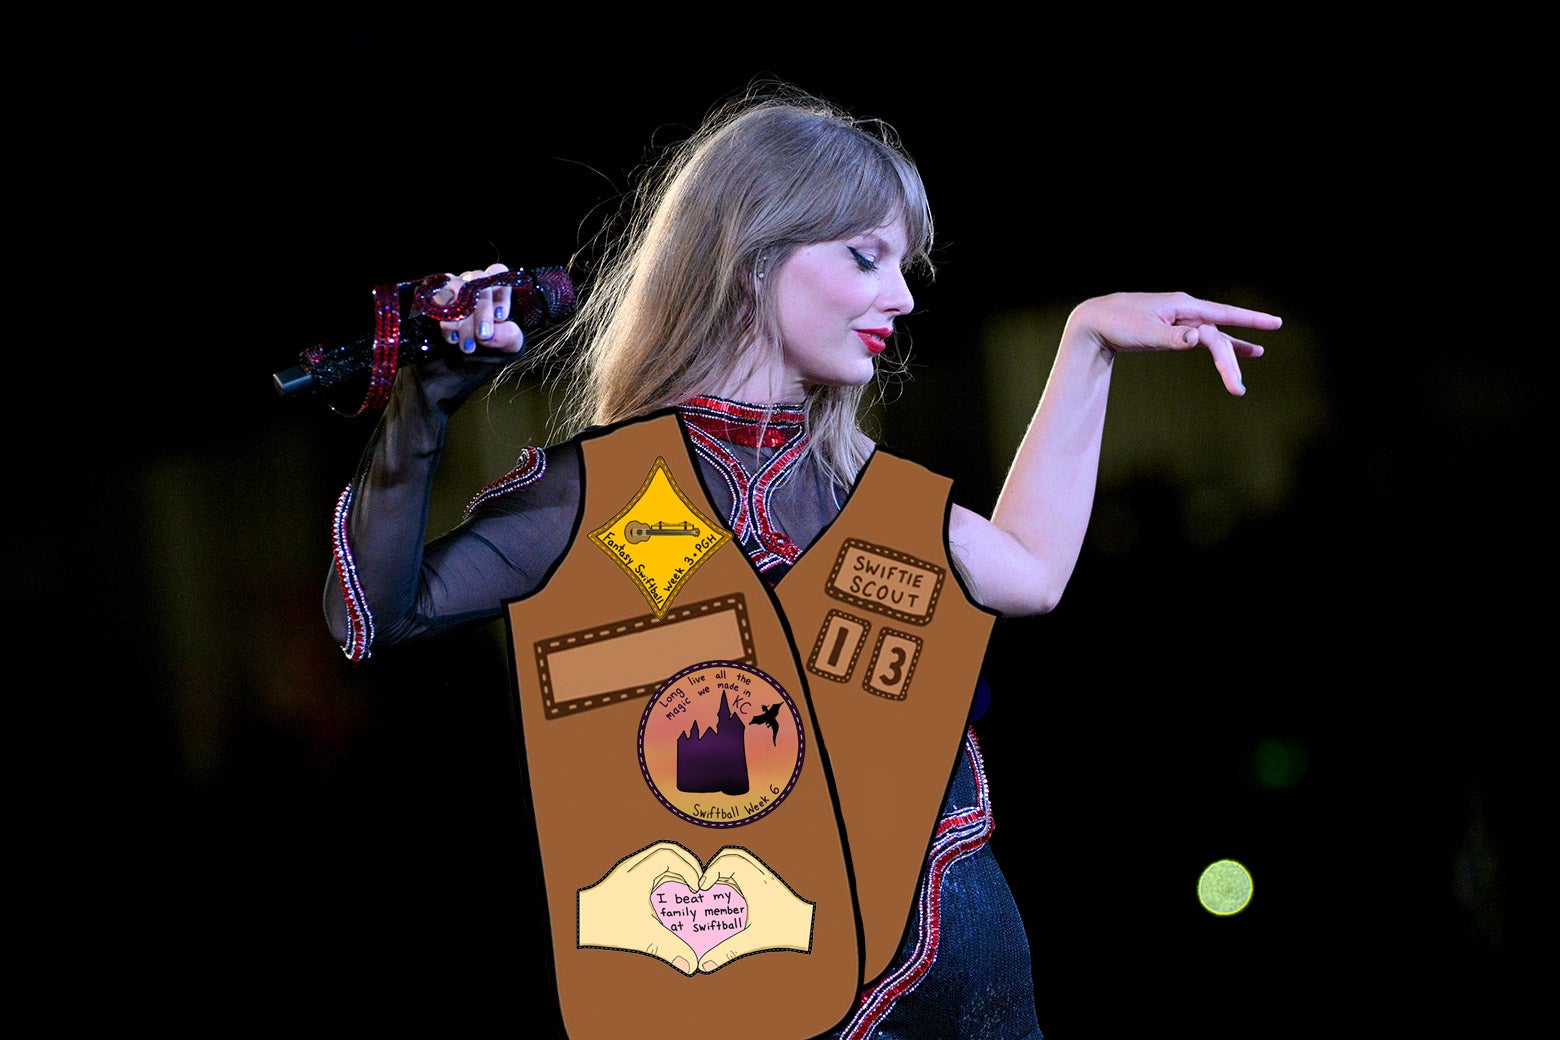 Taylor Swift with a photoshopped vest covered with Swiftball badges.